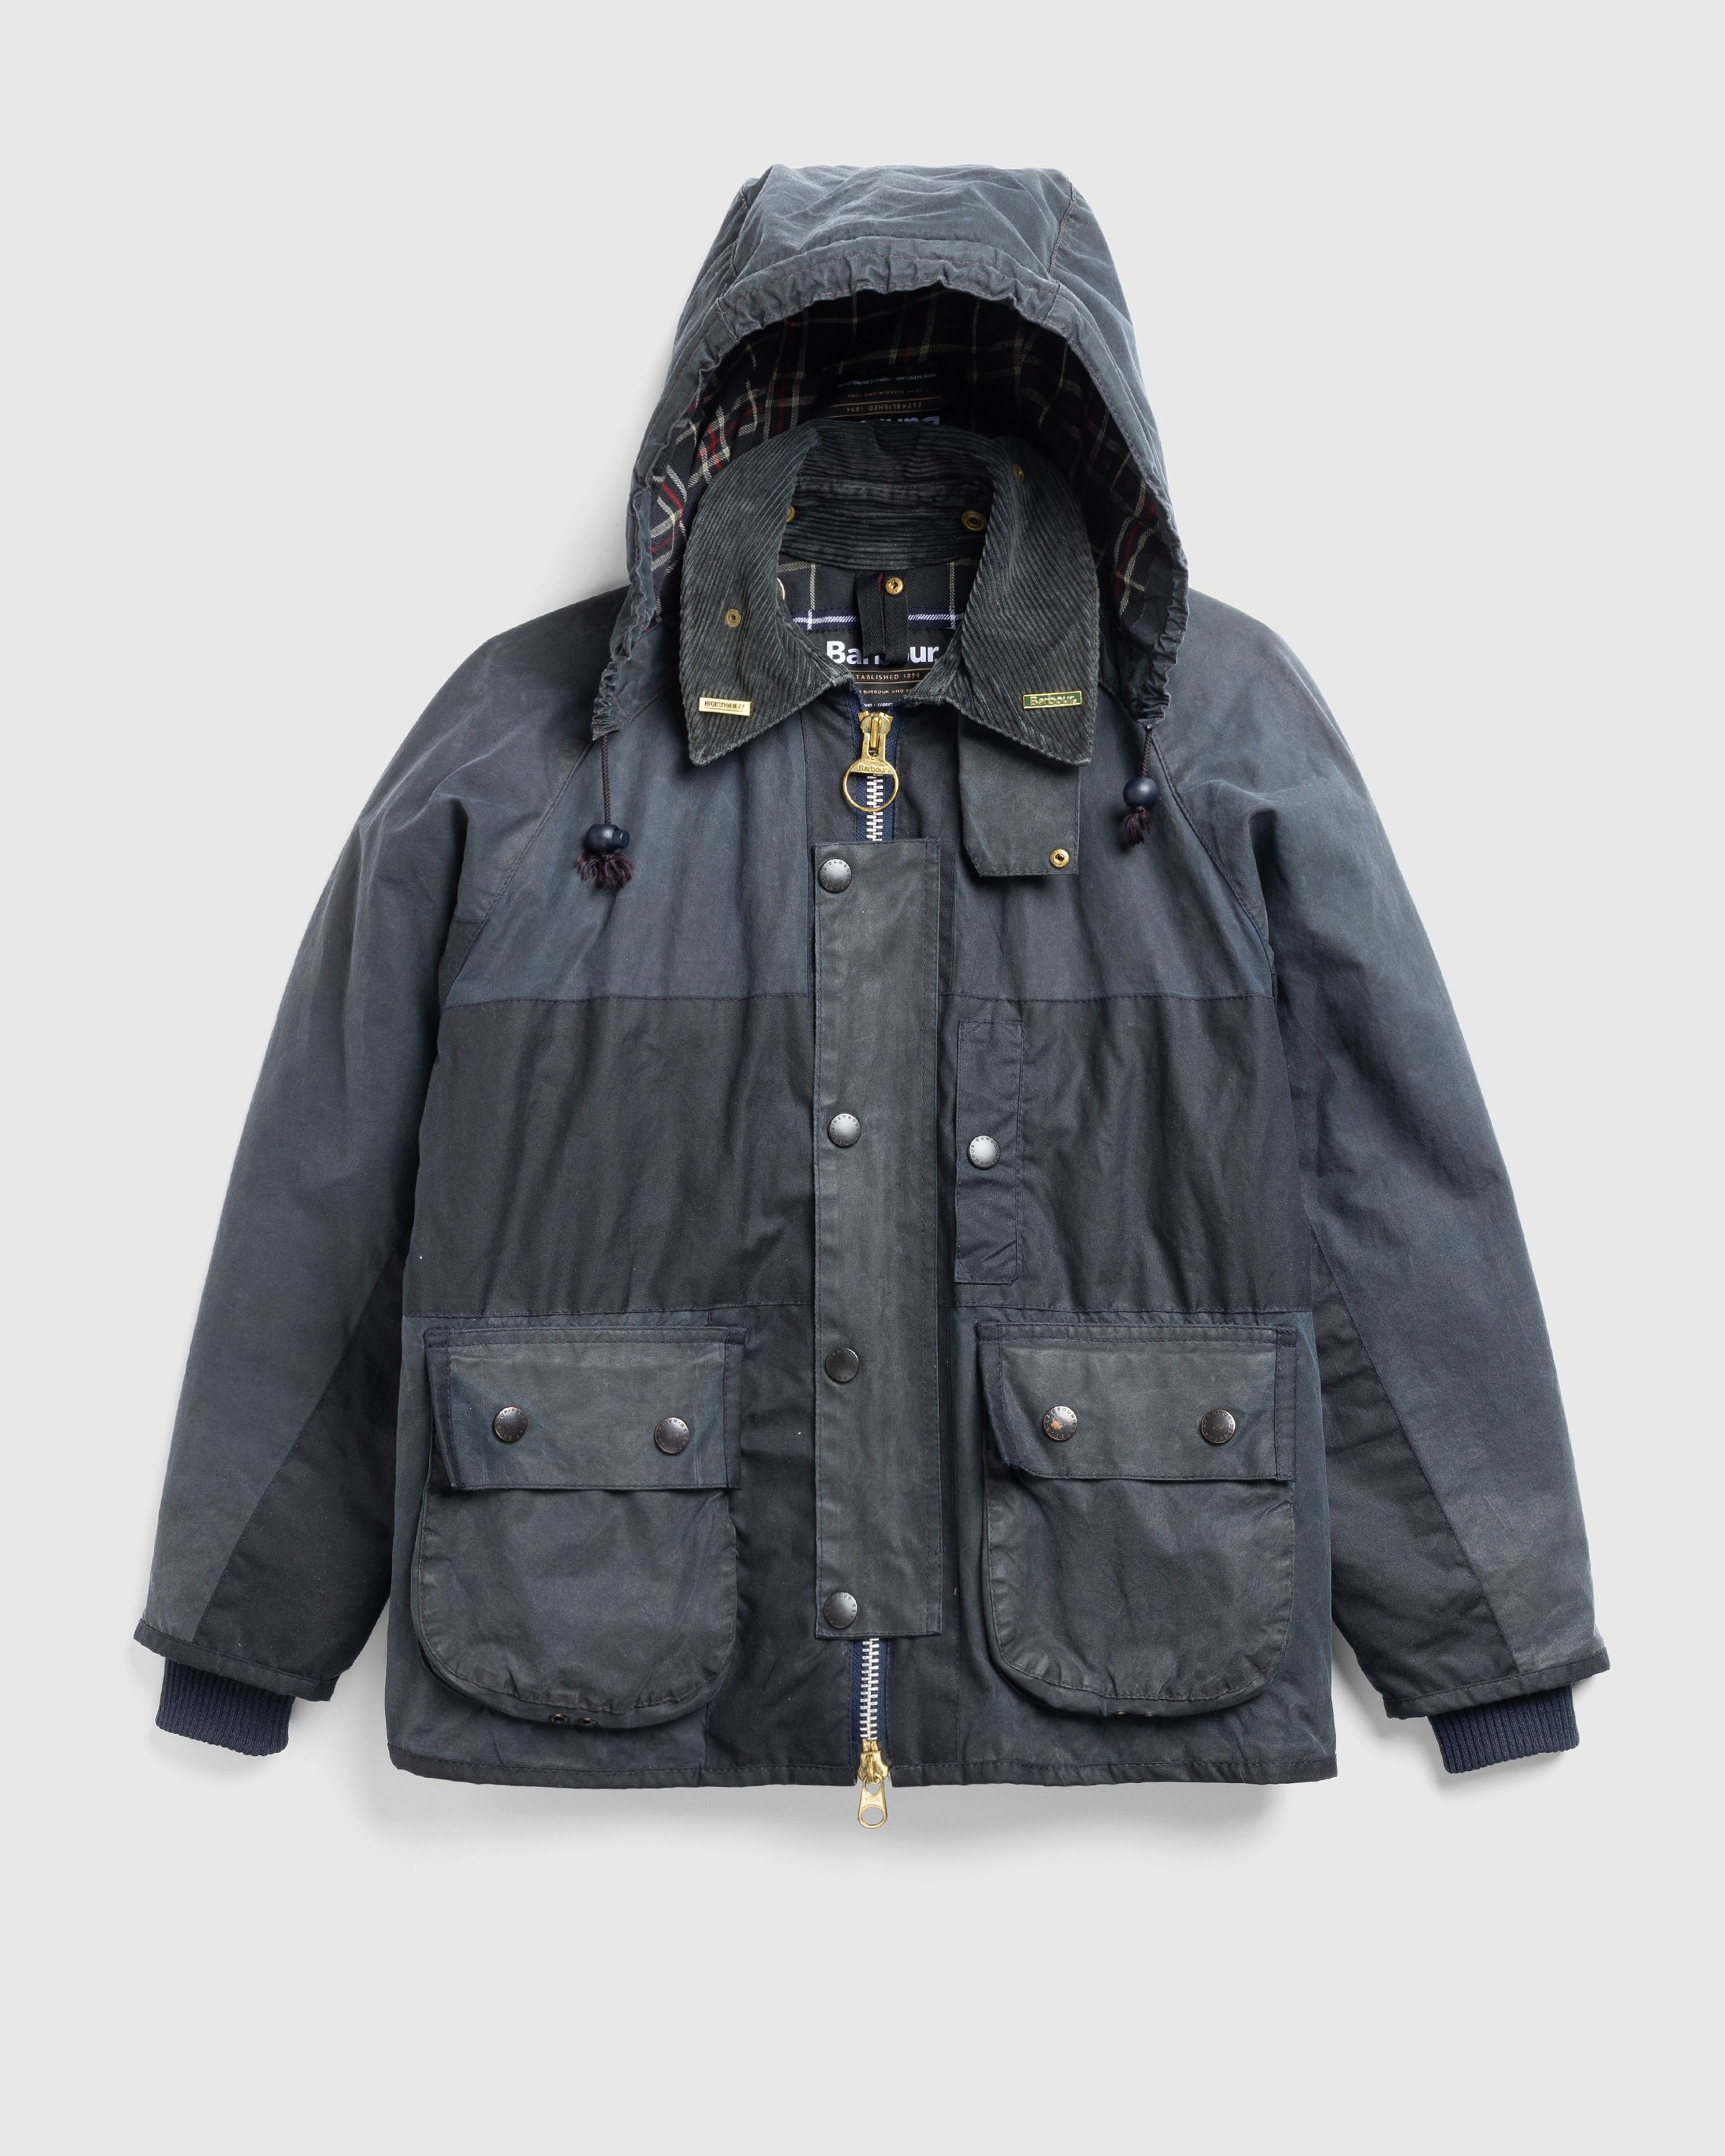 Barbour x Highsnobiety - Re-Loved Cropped Bedale Jacket 1 - 36 - Grey-Black - Clothing -  - Image 1